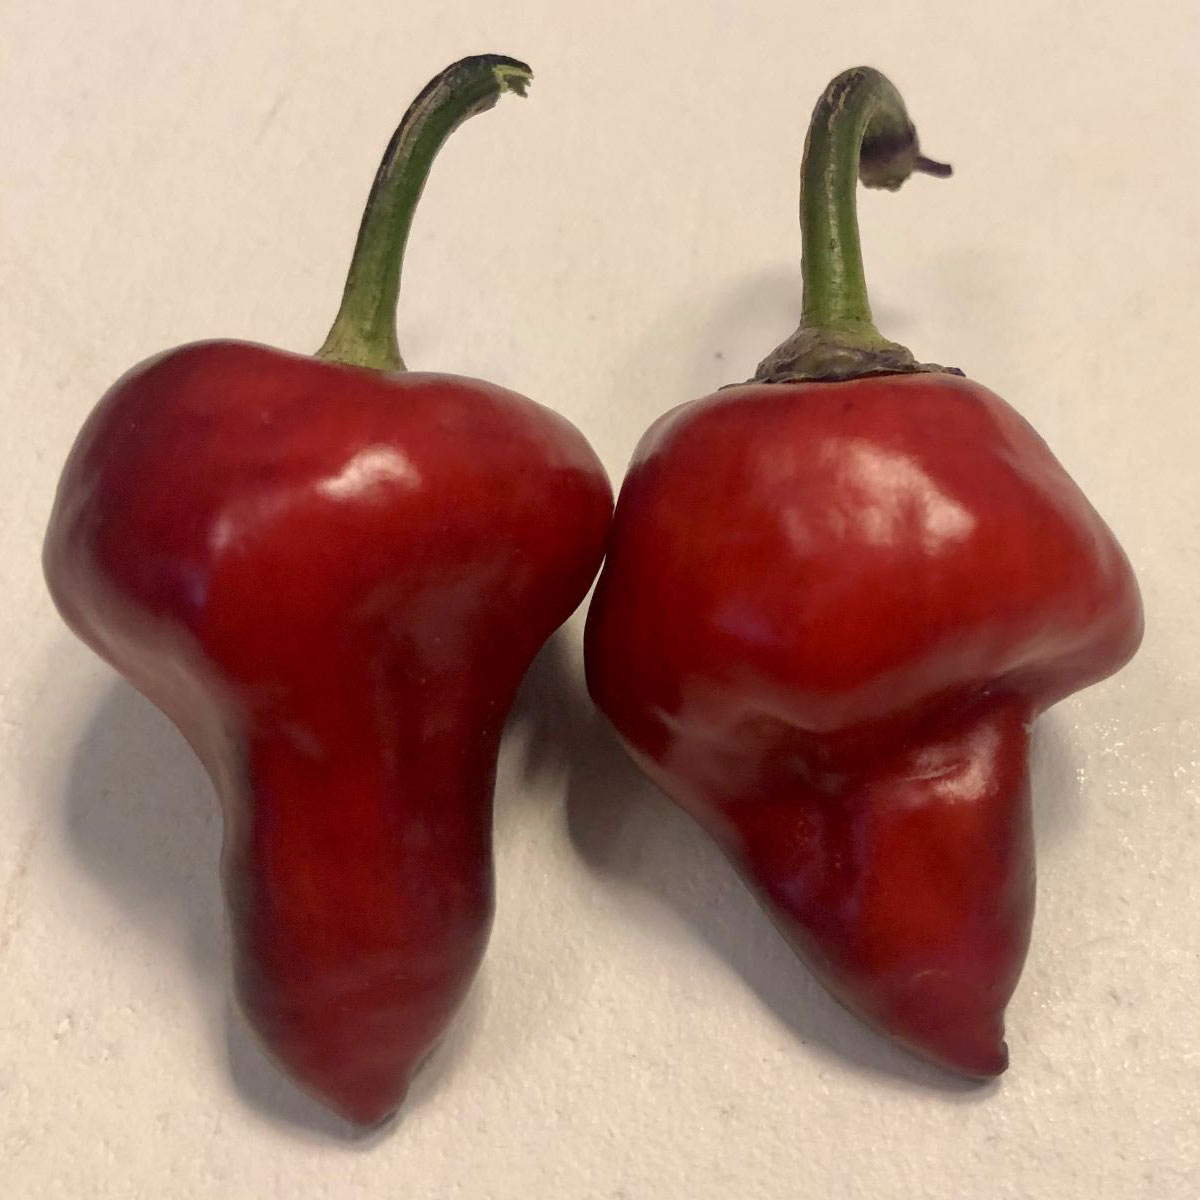 Pepper Joe's Purple UFO seeds - two red peppers on table